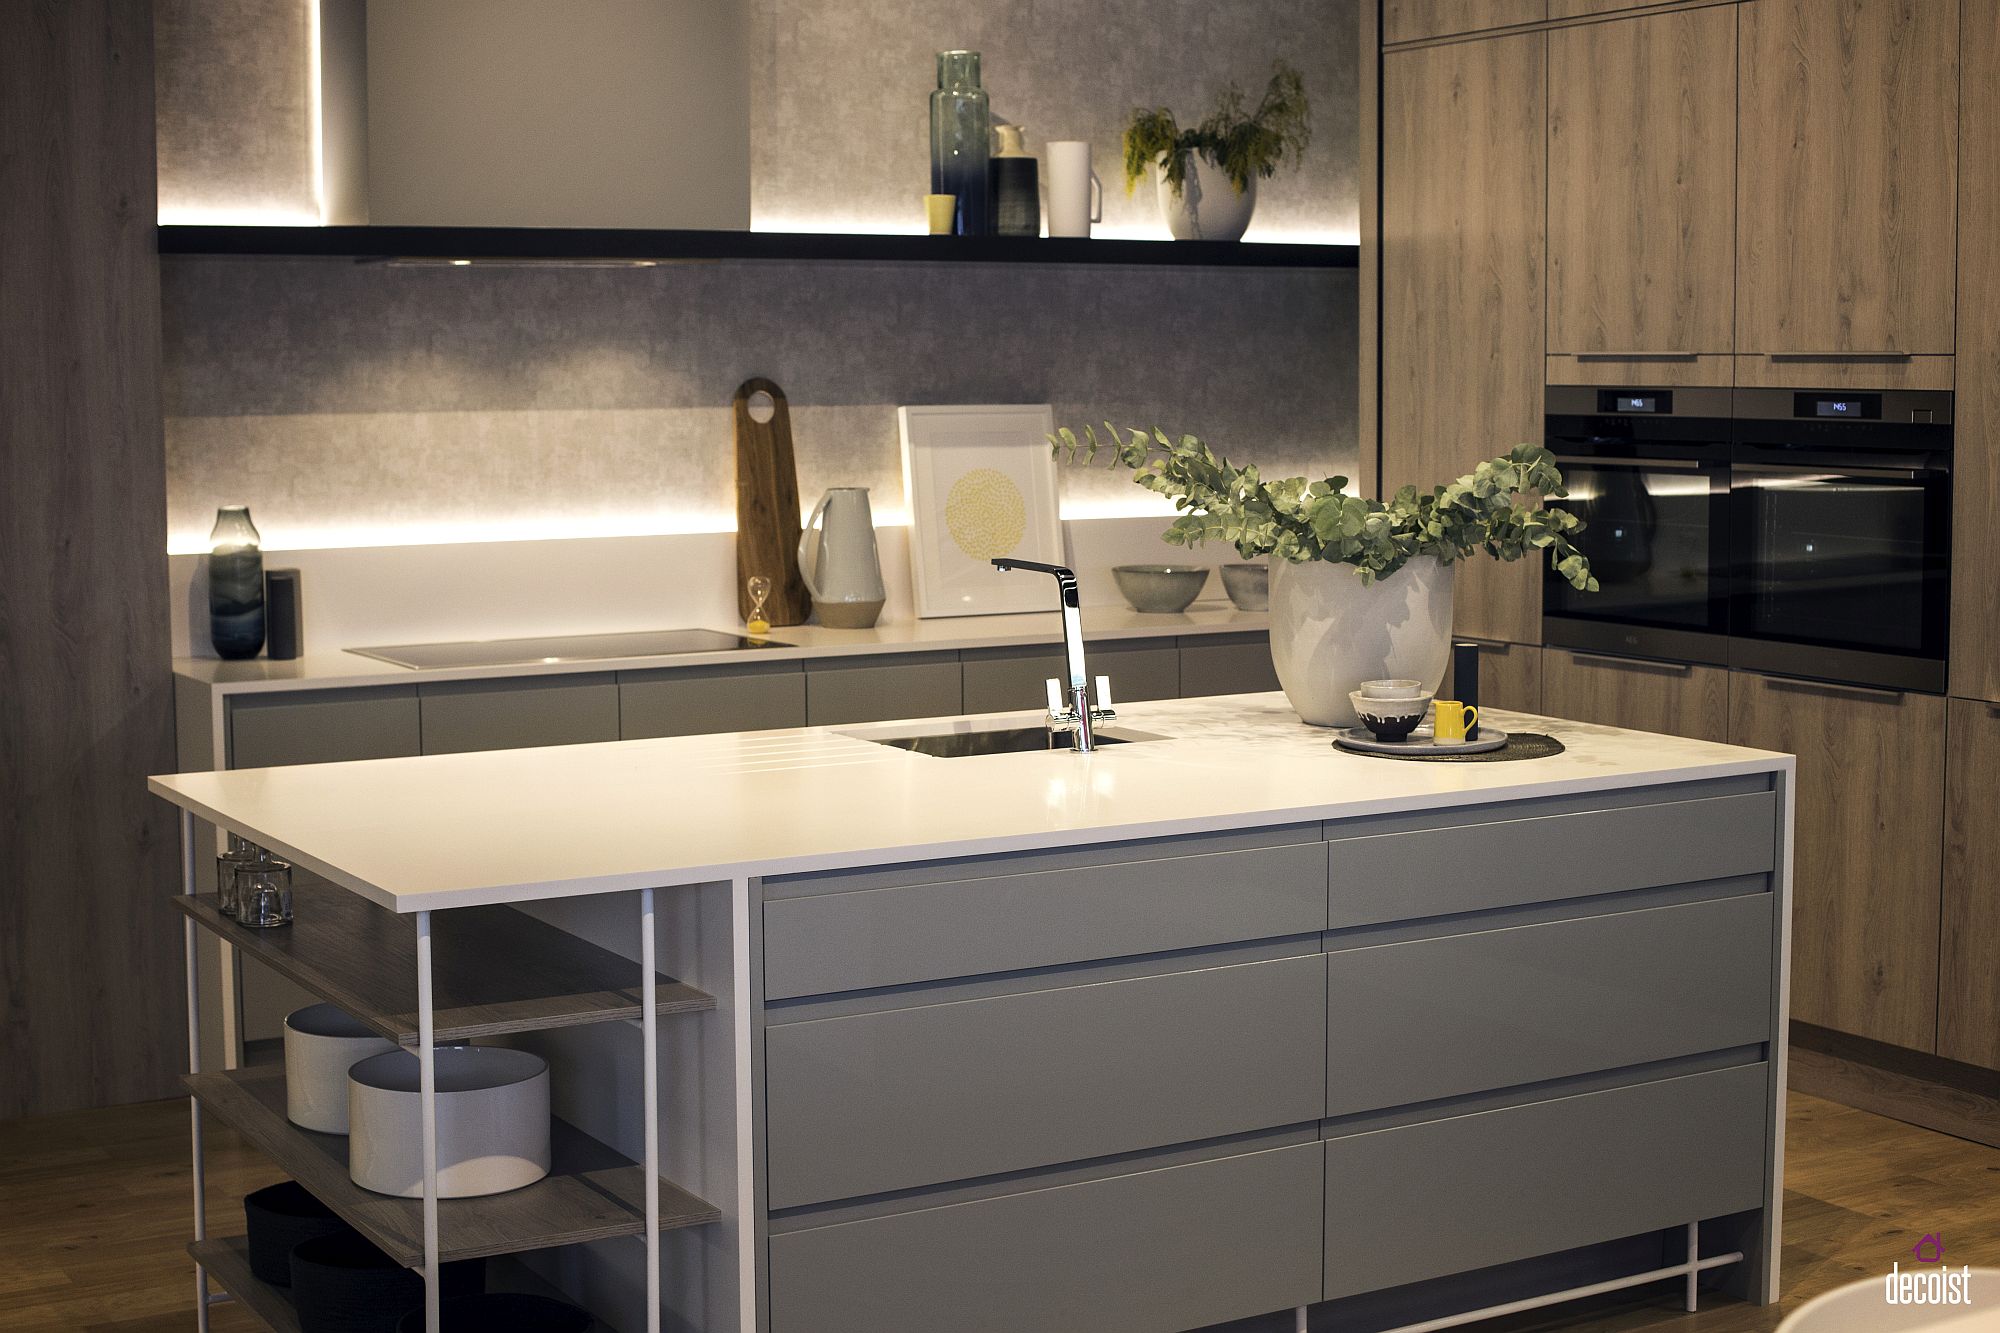 Even the tiniest of kitchens and darkest of corners can be enlivened with LED strip lights